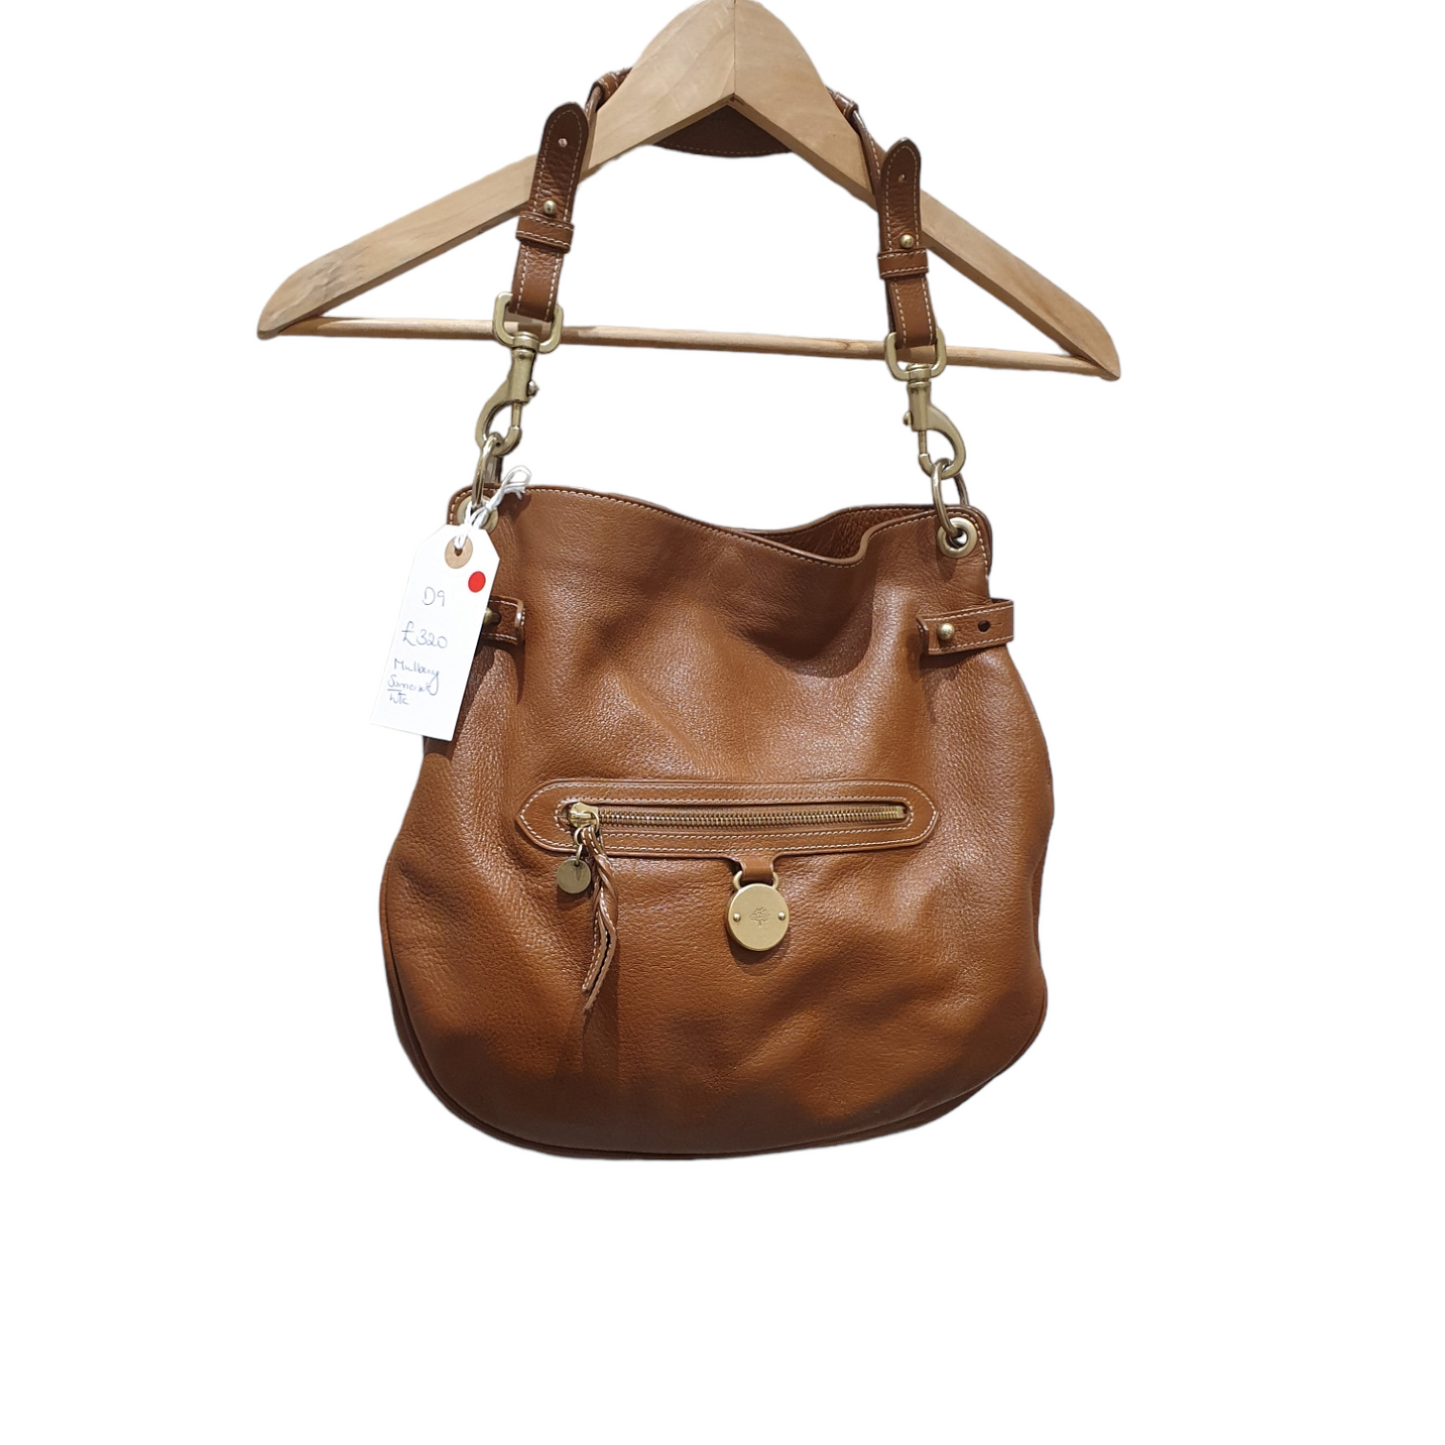 Mulberry Somerset Tote in Oak